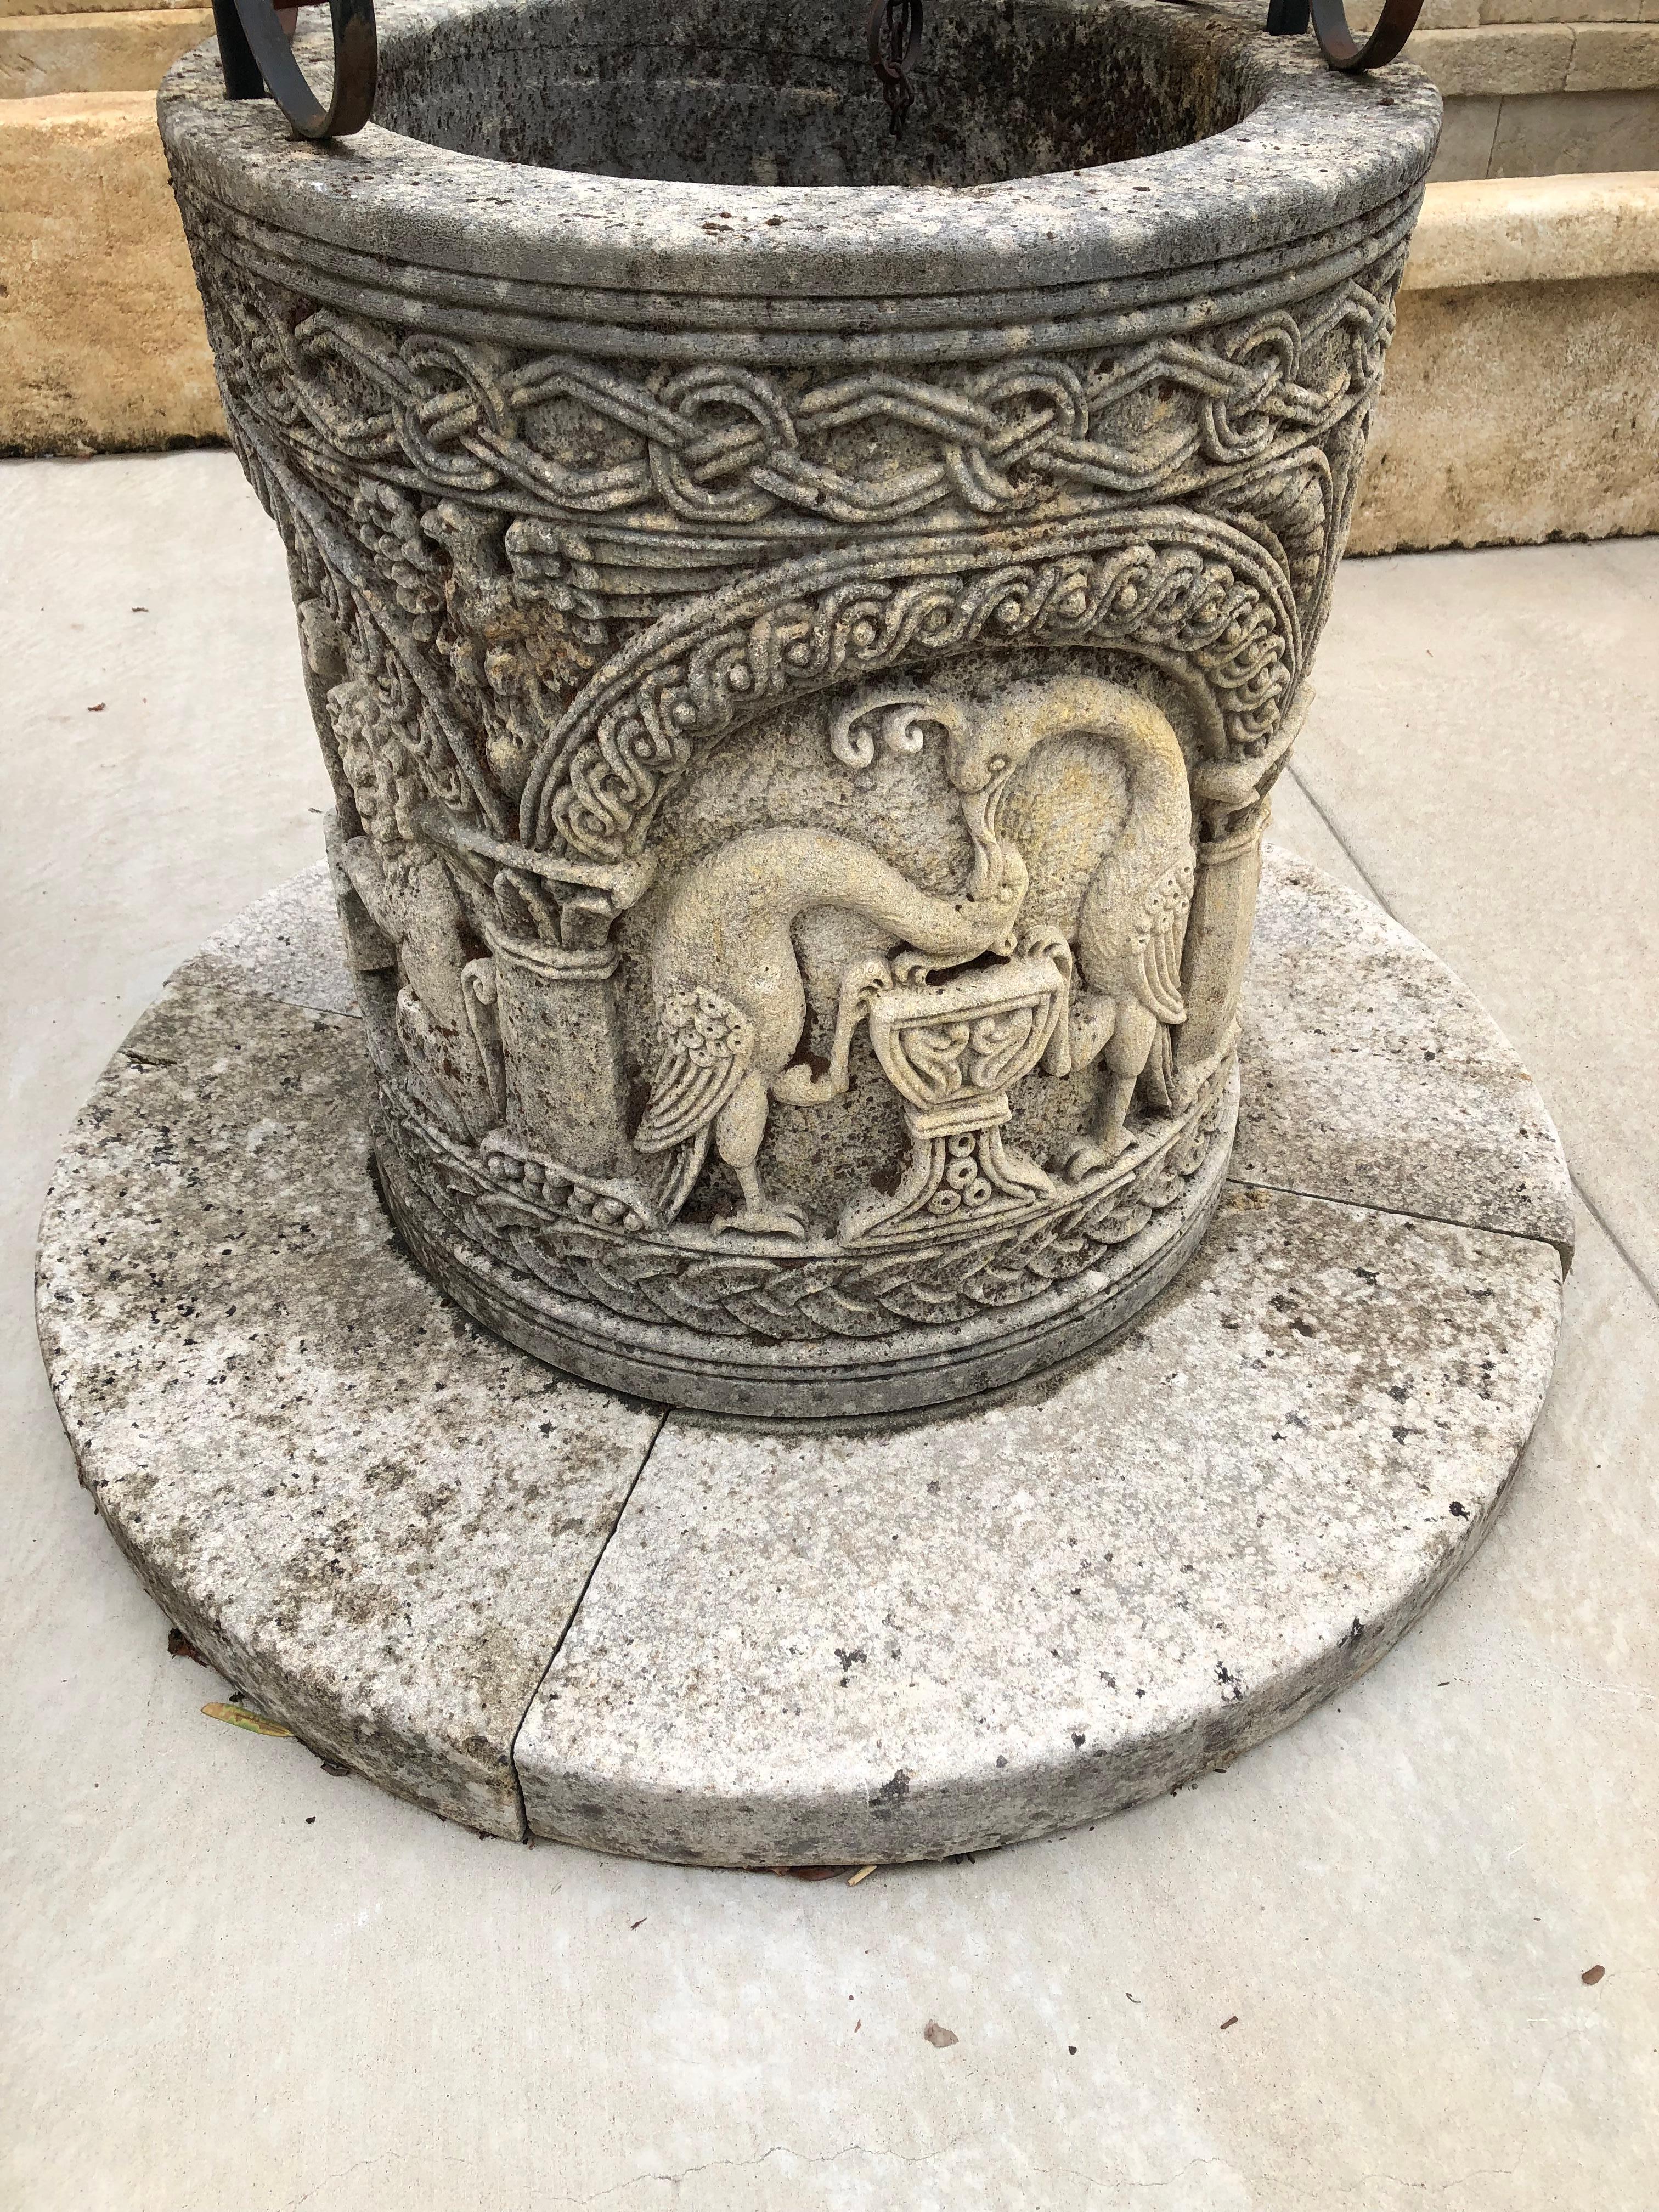 Hand-carved in the middle Byzantine style (which corresponds to Western Europe’s Medieval period), this highly detailed wellhead from Italy has a large, elaborate iron overthrow that rises over five feet above the top of the well. The overthrow